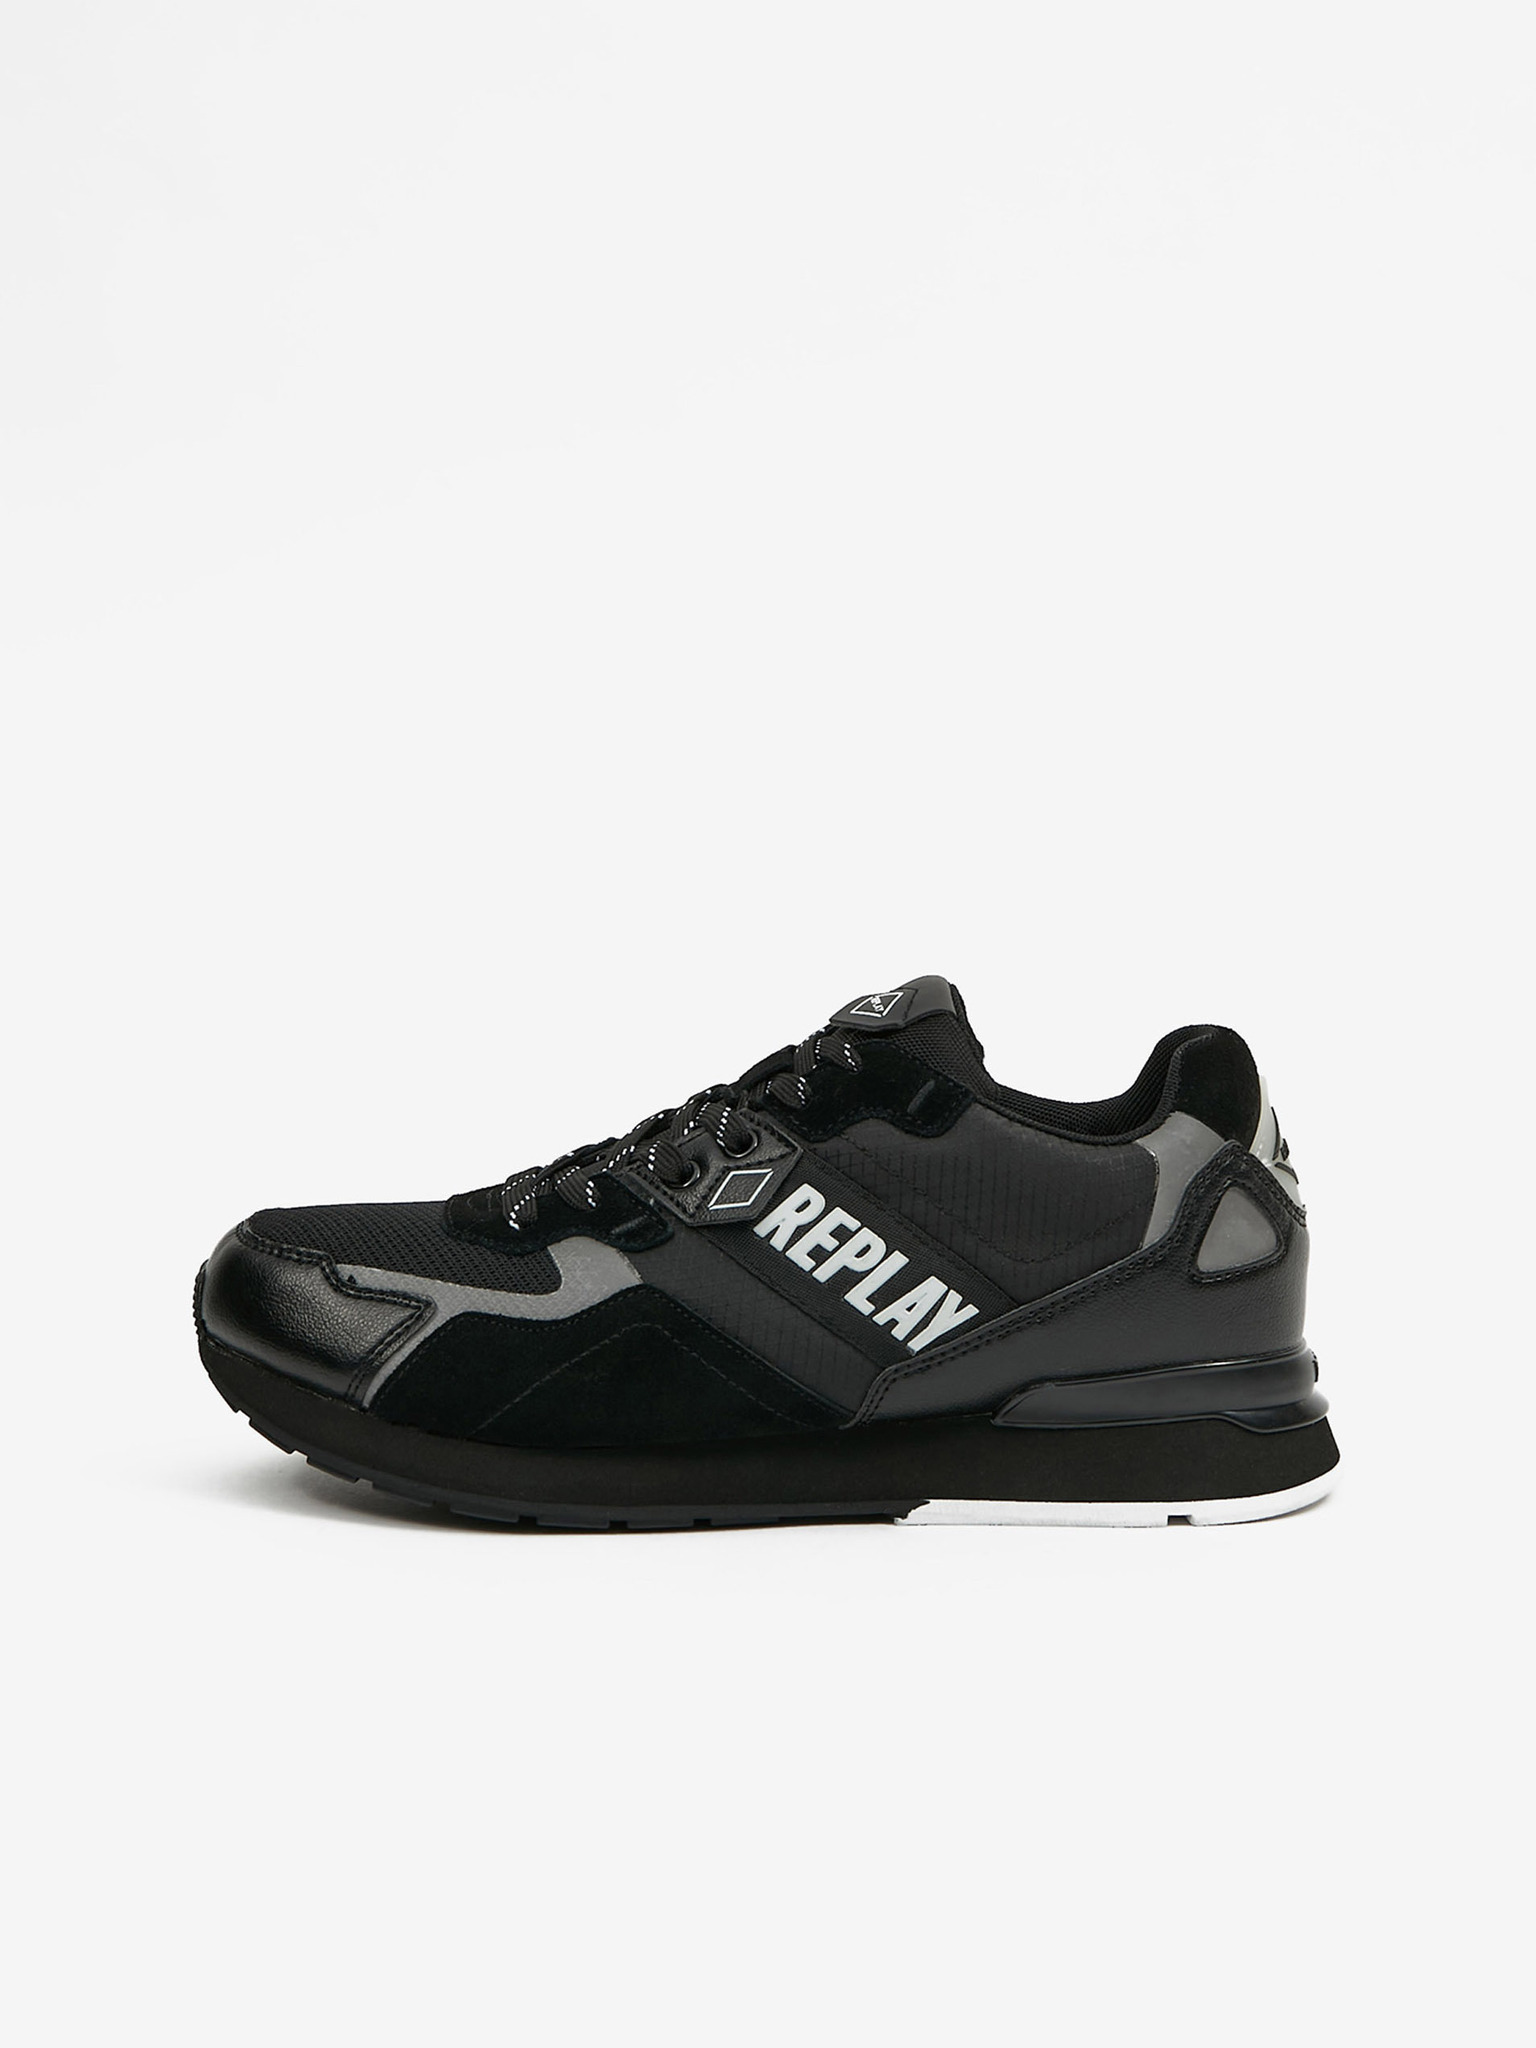 replay shoes black